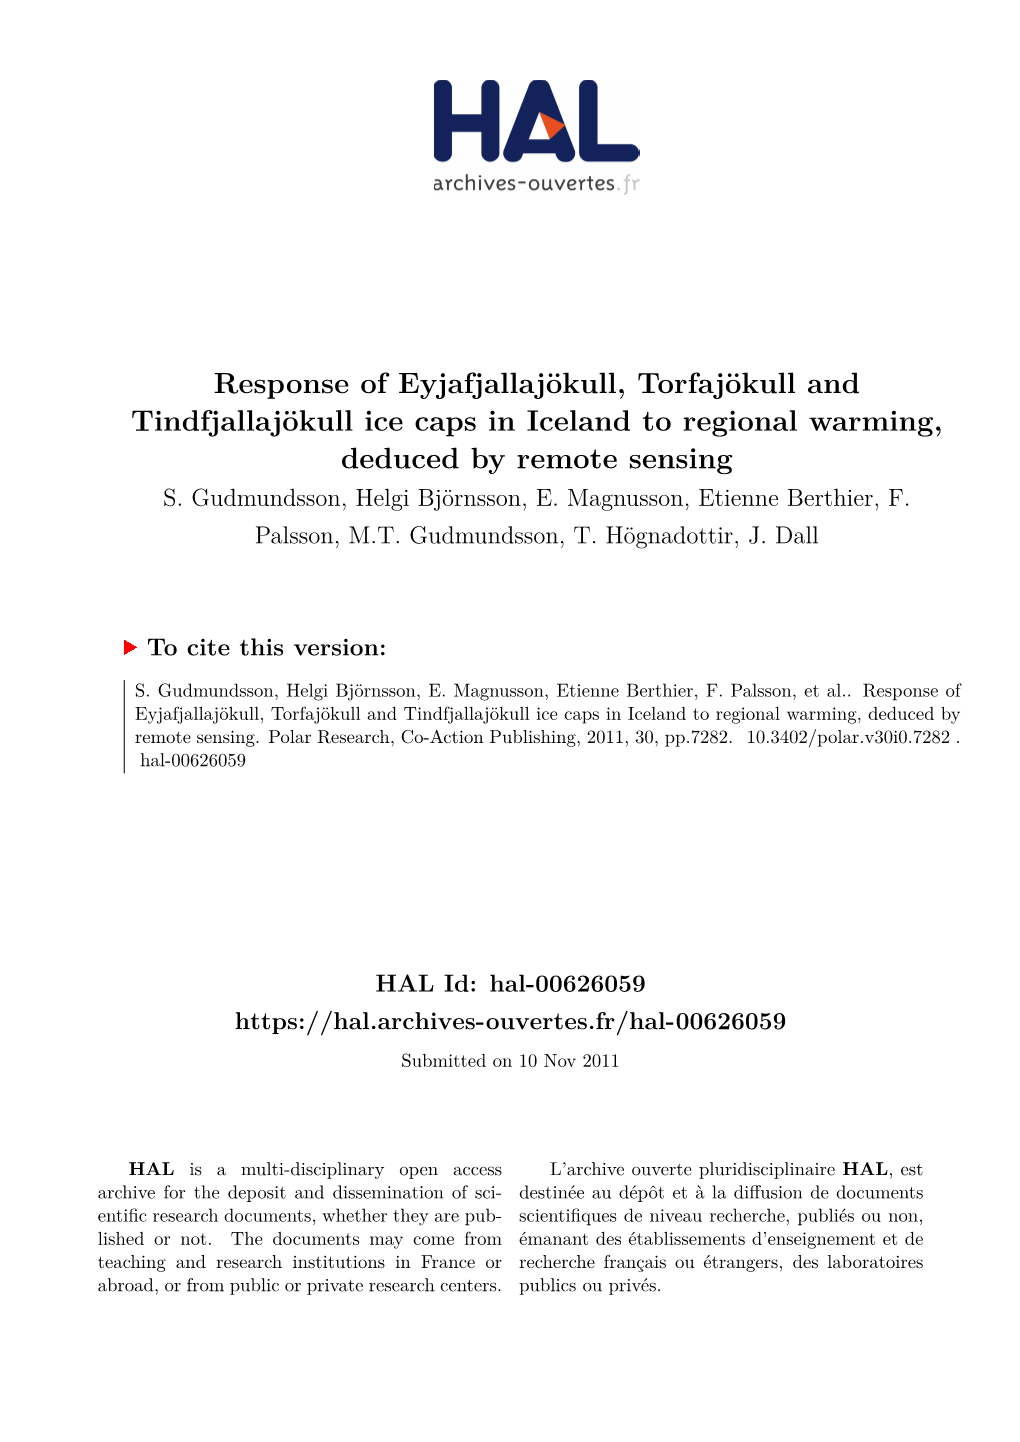 Response of Eyjafjallajökull, Torfajökull and Tindfjallajökull Ice Caps in Iceland to Regional Warming, Deduced by Remote Sensing S